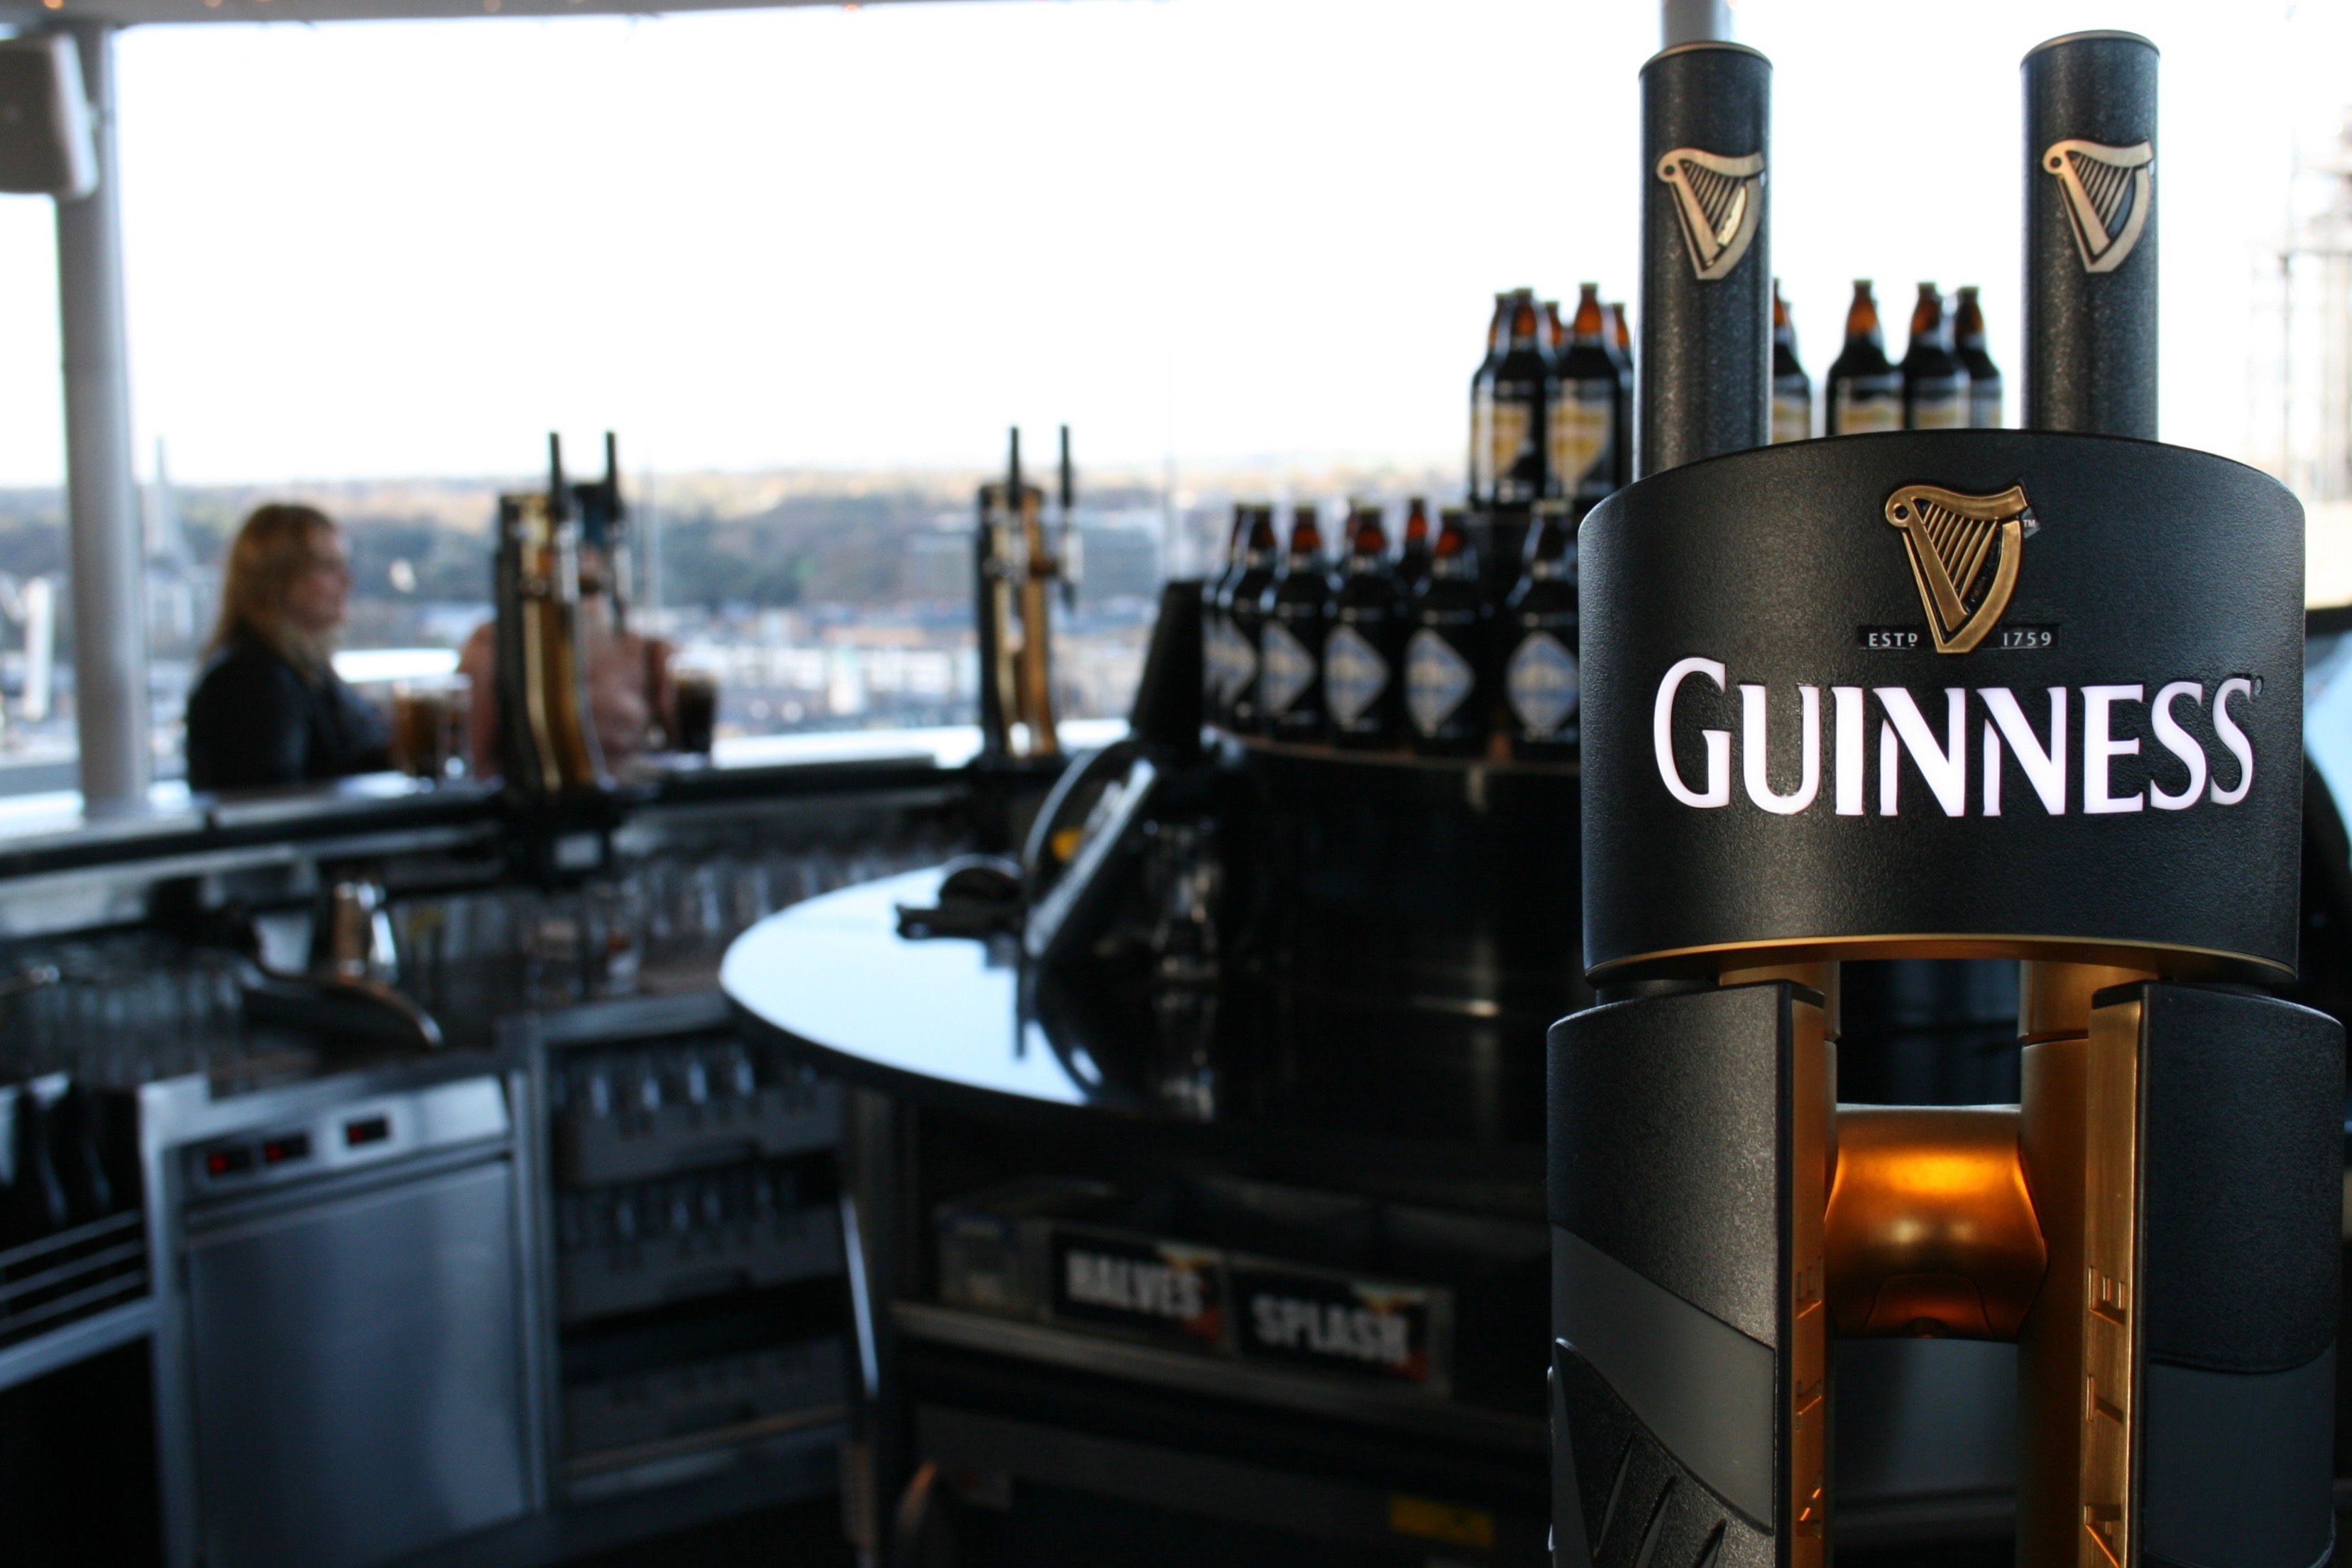 Guinness taps at the Gravity Bar atop the Guinness Storehouse.